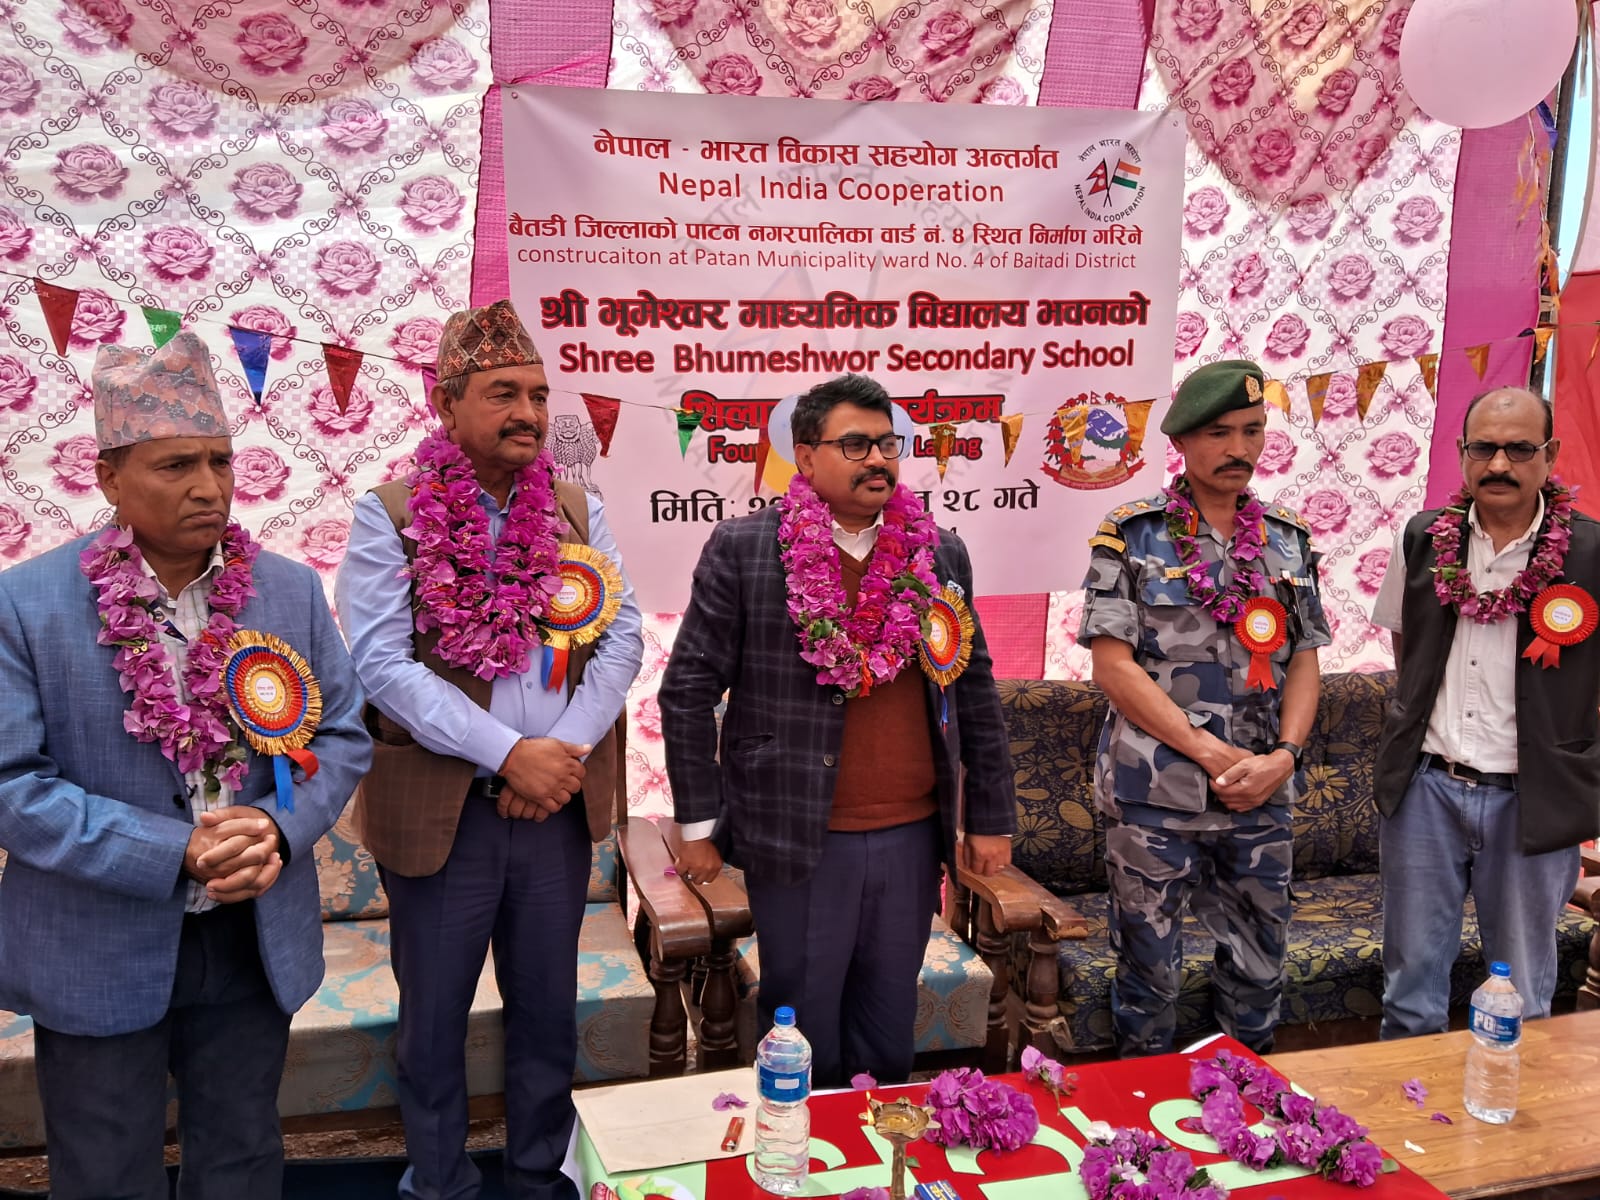 Foundation stone laid for school building Project in Baitadi district